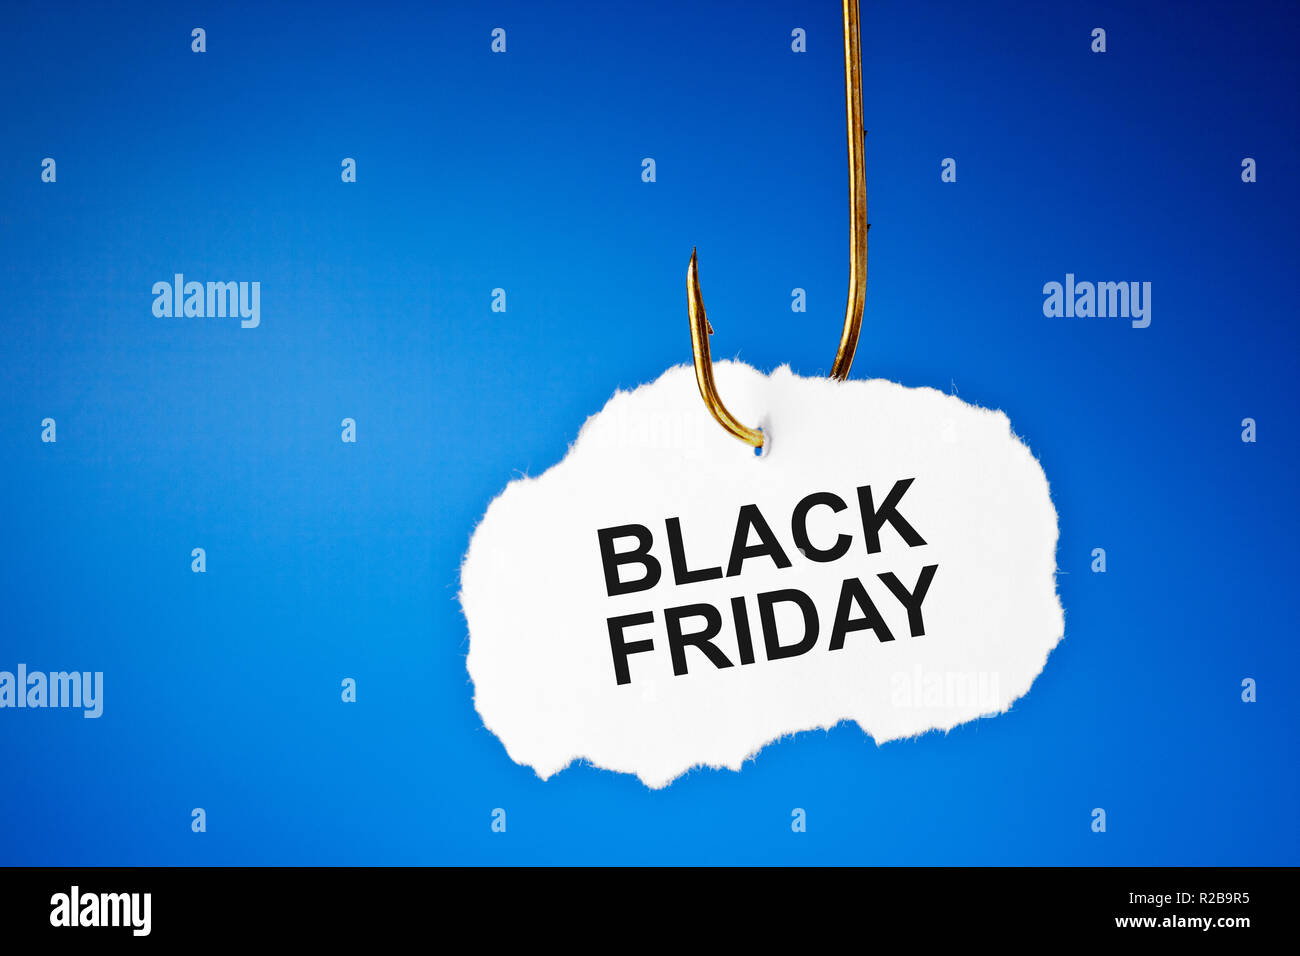 Text Black Friday hanging on a fishing hook over blue background. Beware of the Black Friday sale trap concept. Stock Photo